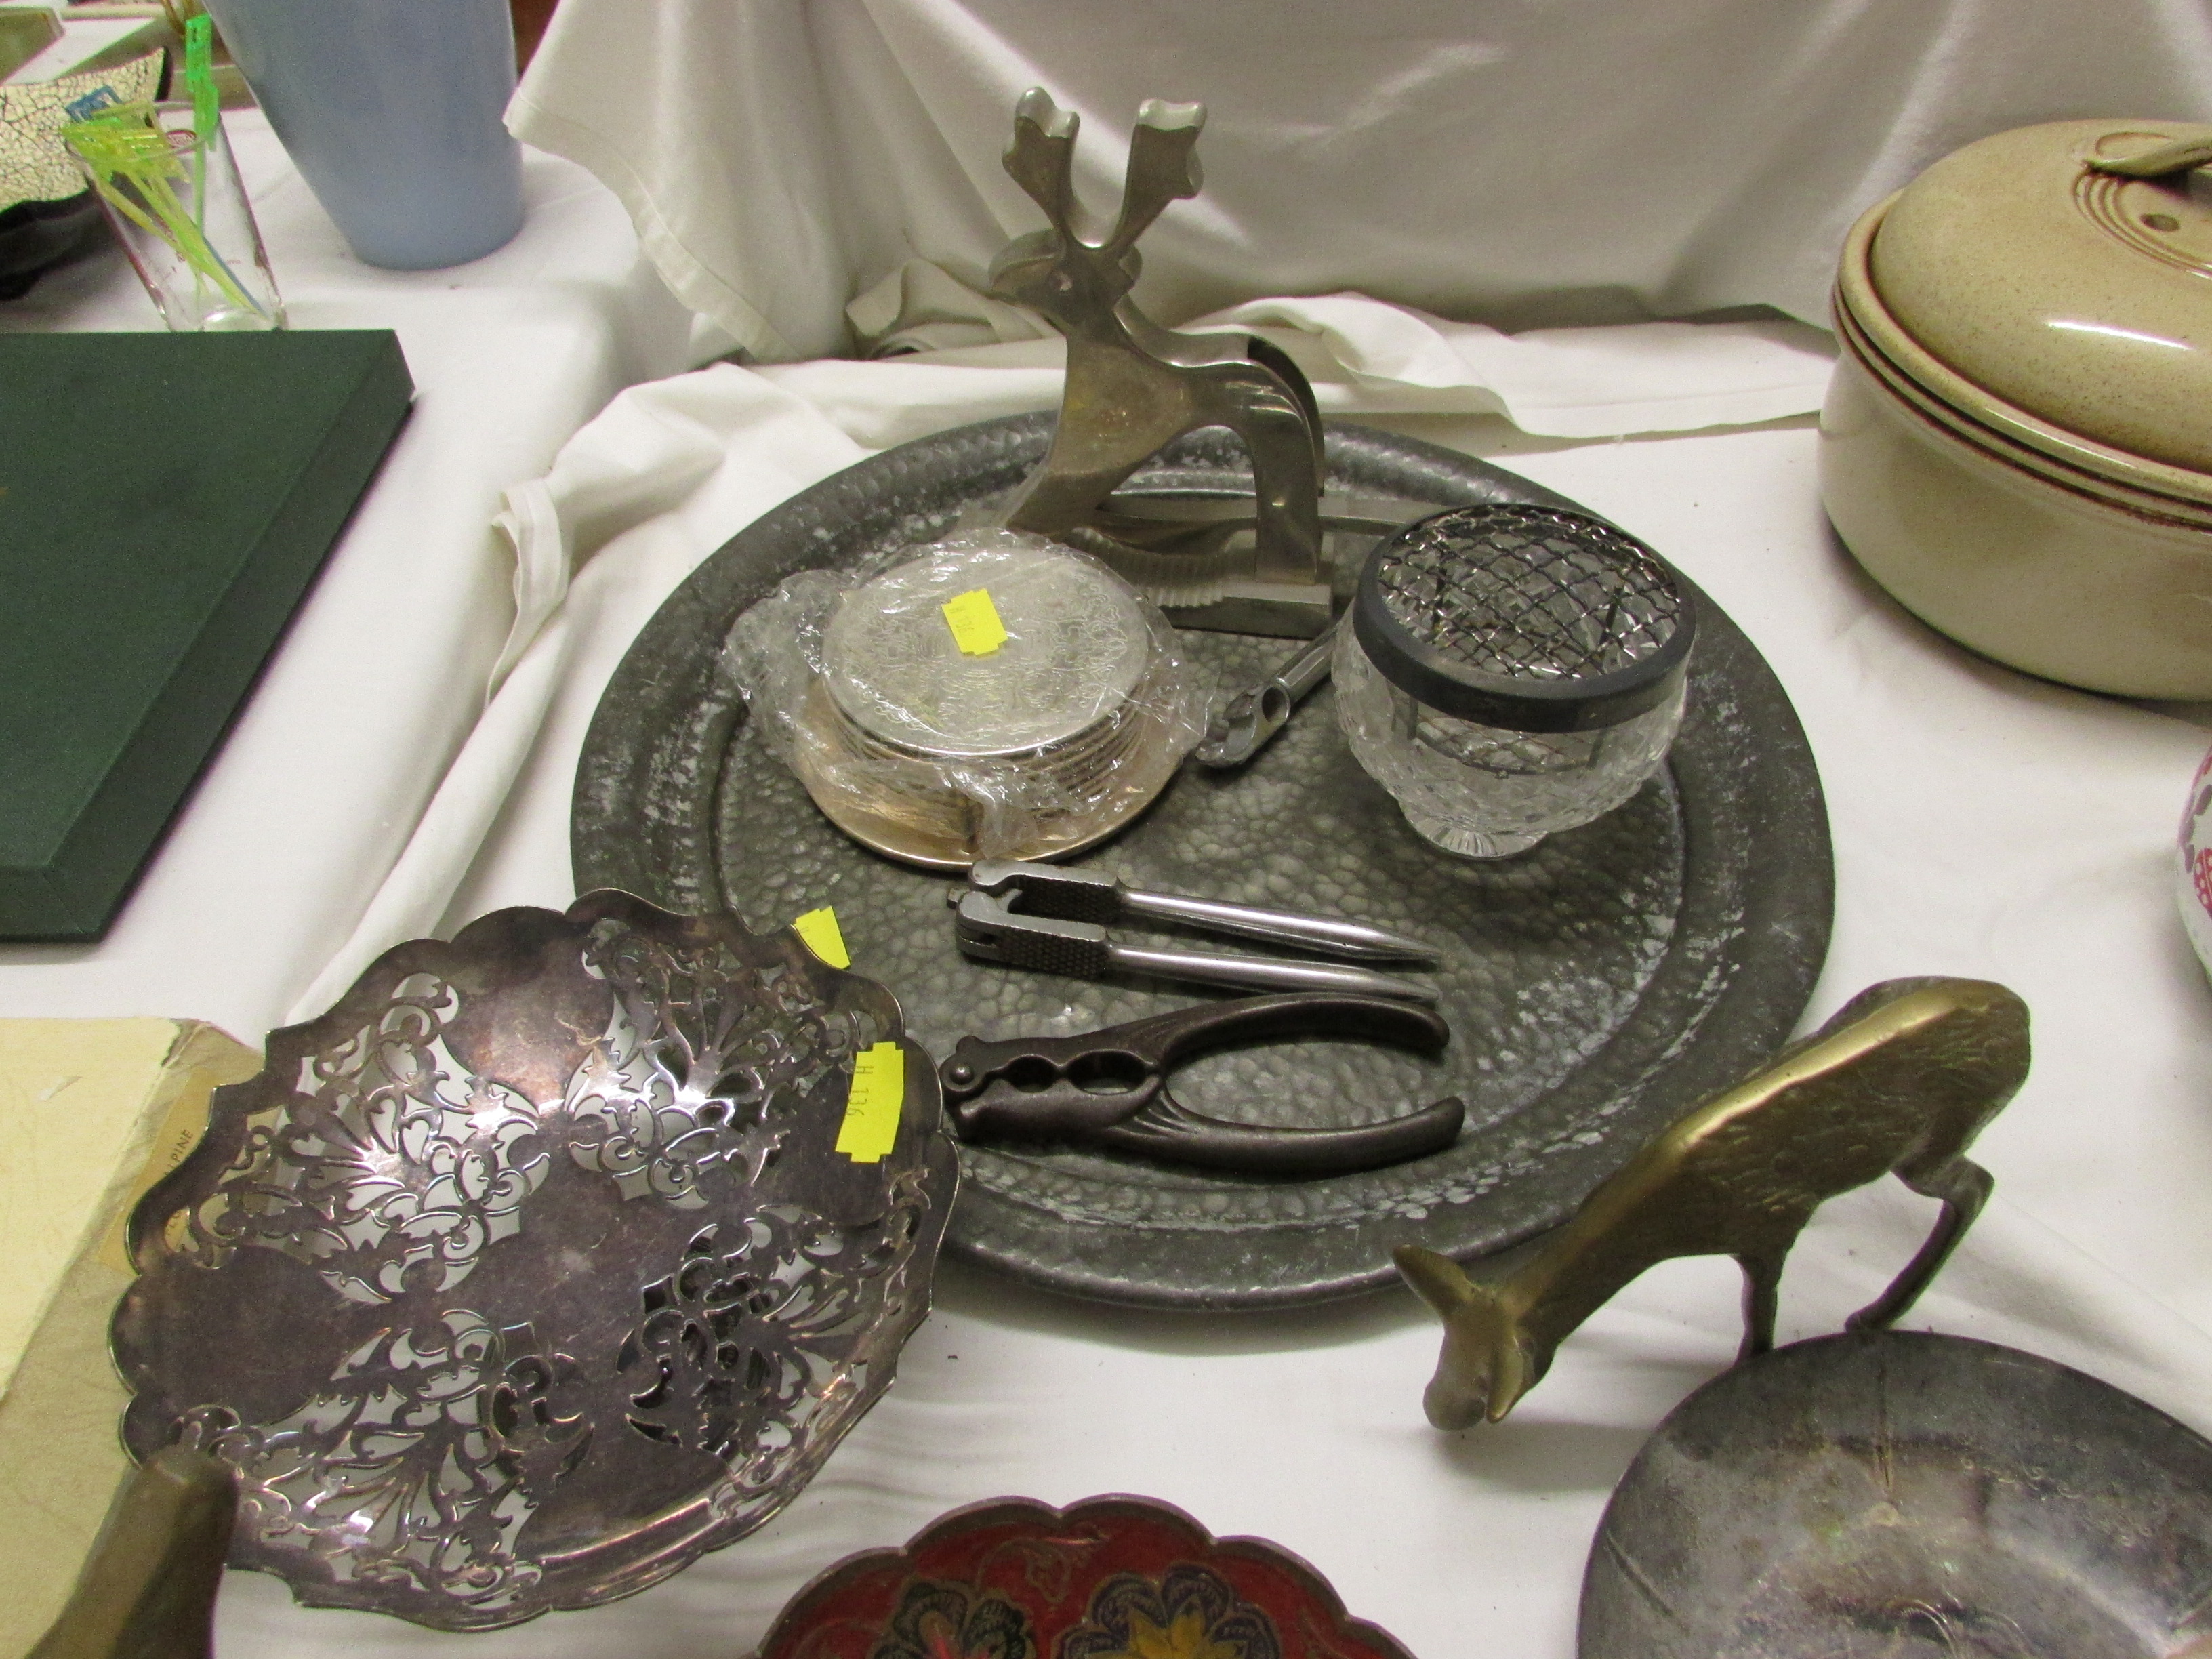 PLANISHED PEWTER TRAY, SILVER-PLATED BOWL ON FOOT, ASSORTED CUTLERY AND OTHER METAL WARE - Image 2 of 3